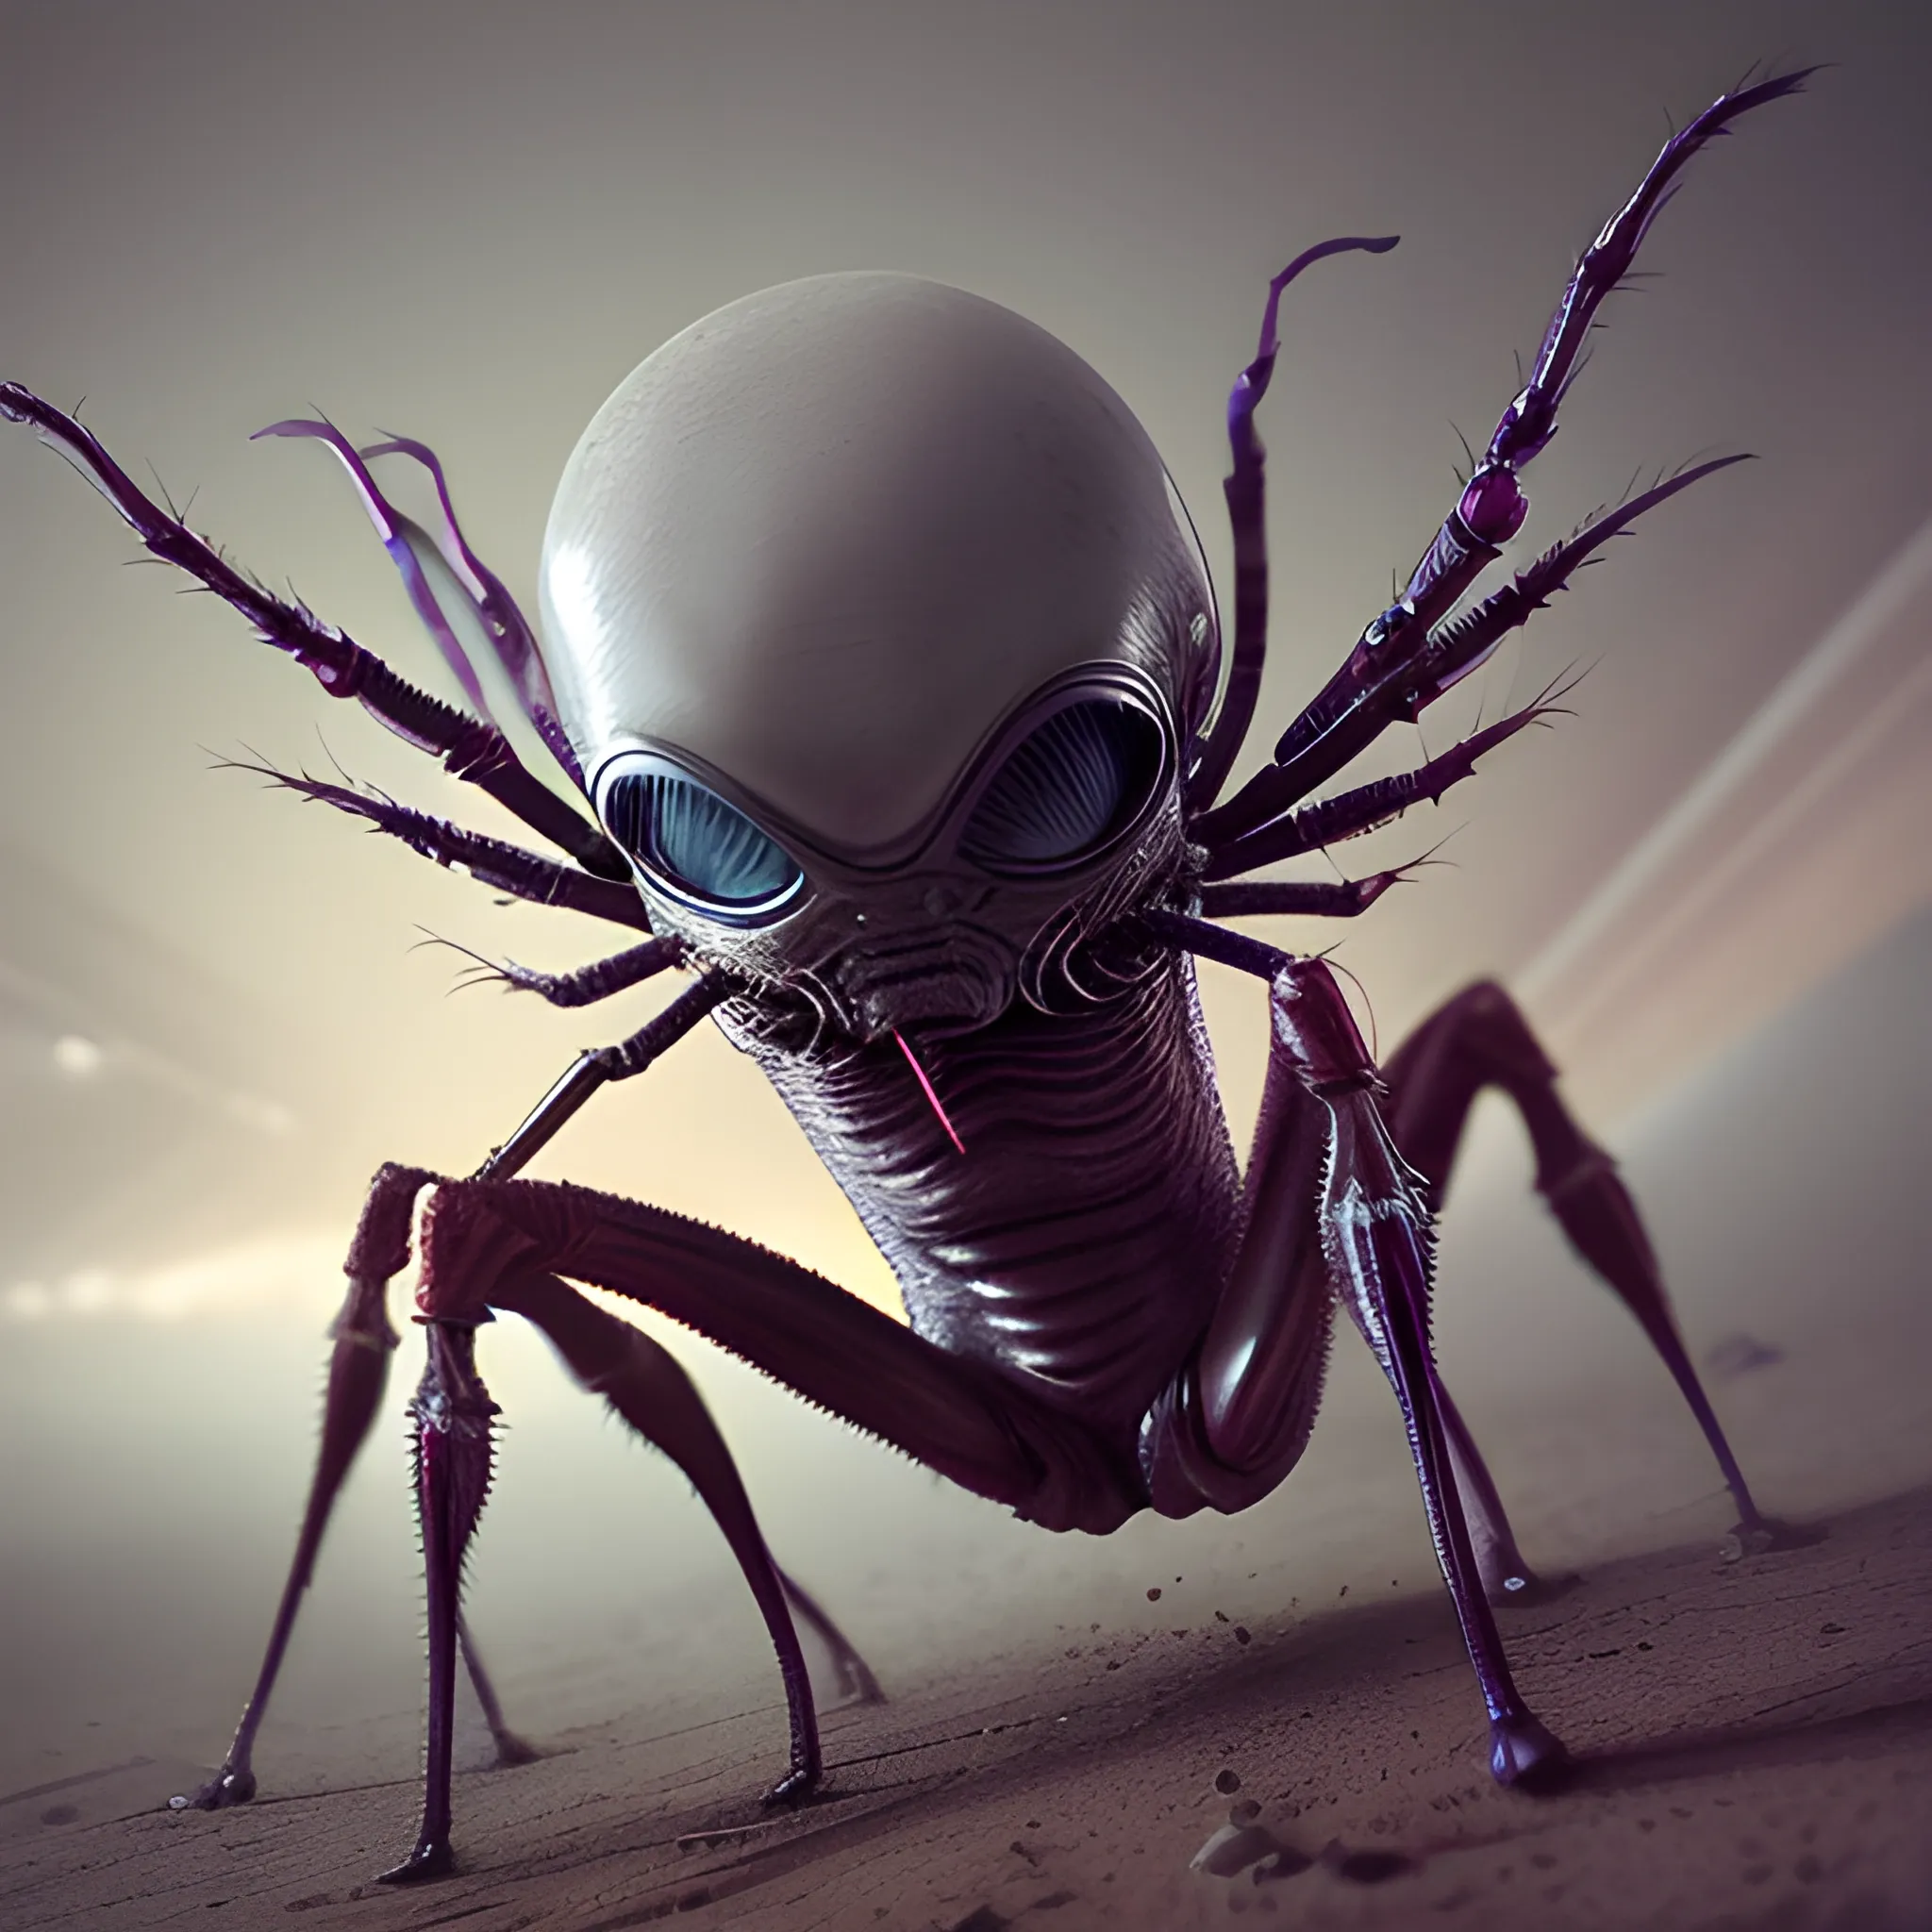 A high resolution, cinematic photo of an alien with spider legs coming out of it's head